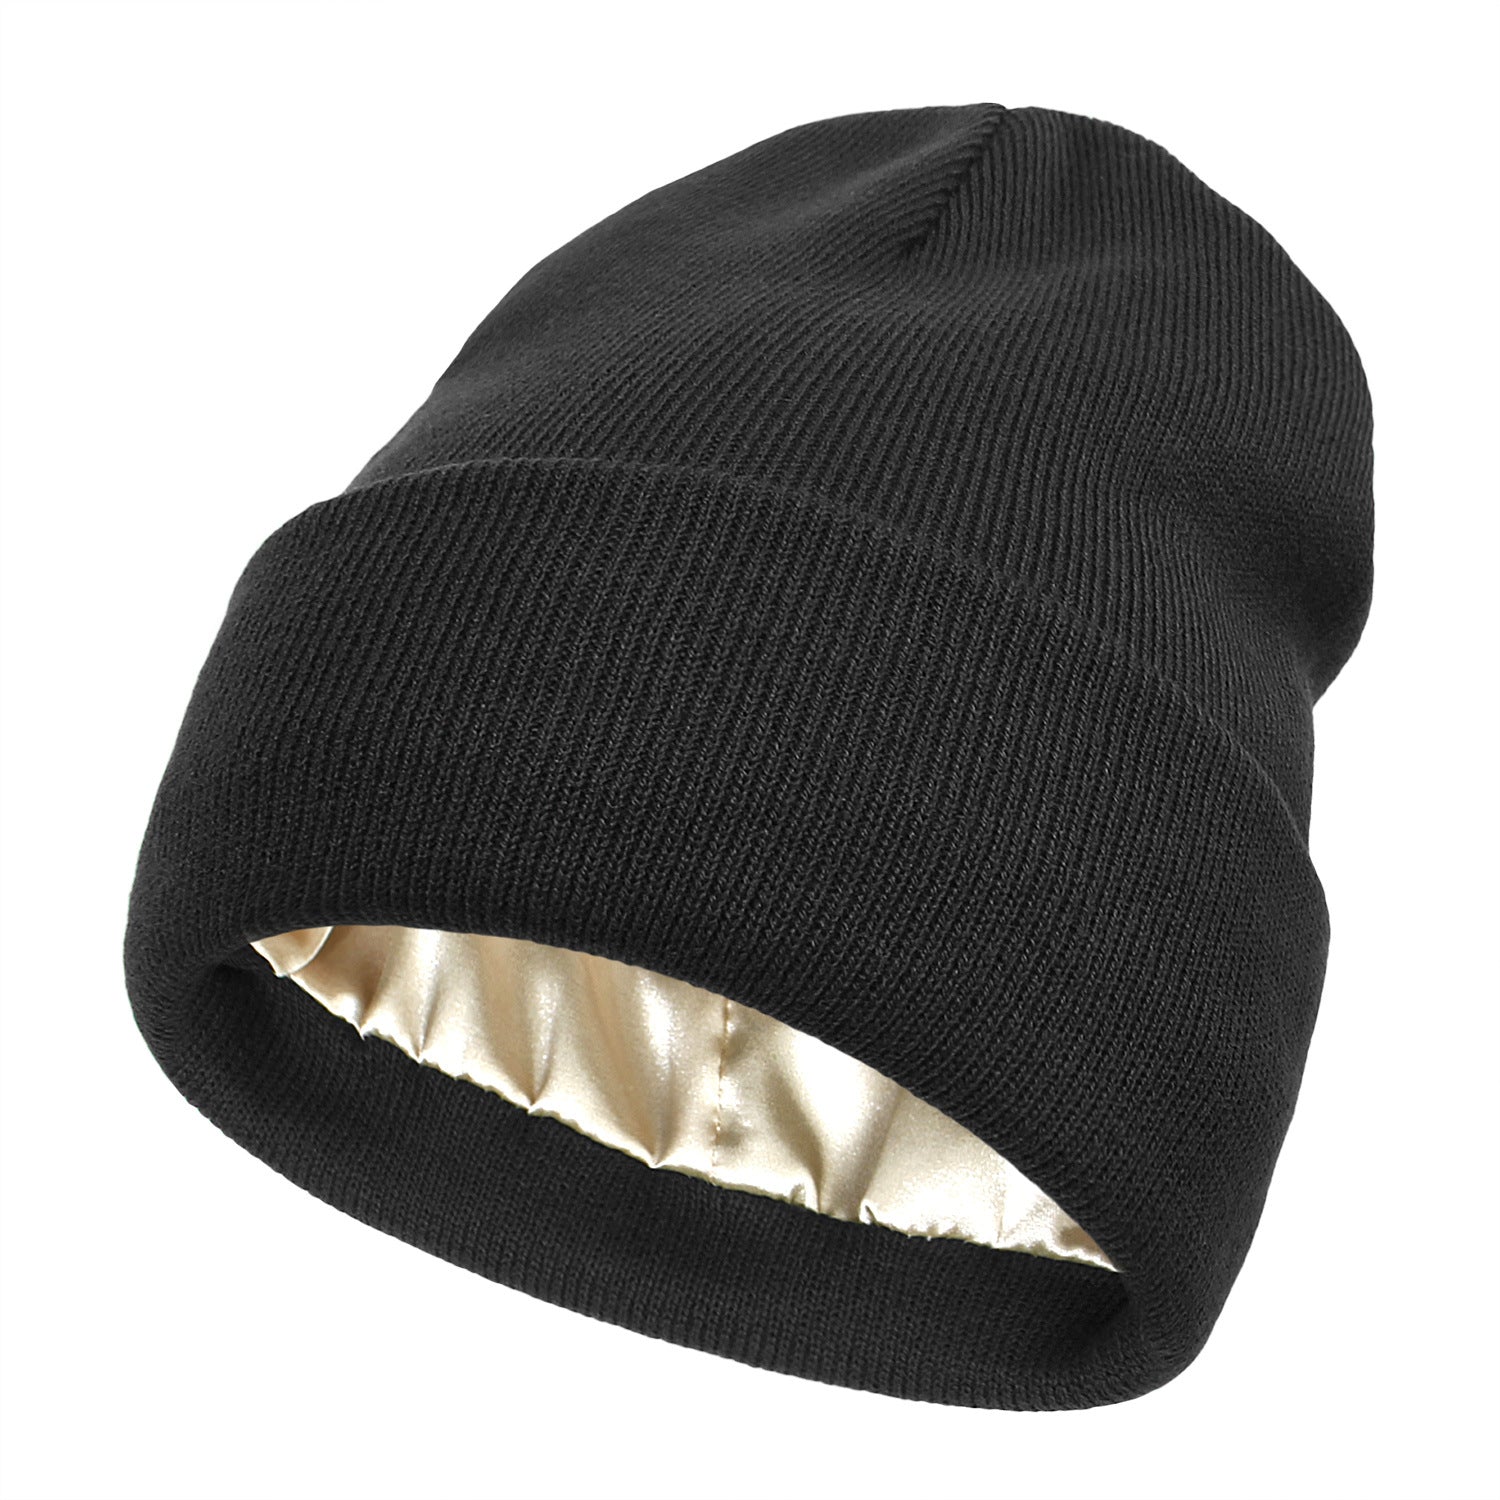 Importikaah-Stylish-Satin-Beanie-designed-comfort-hair-care-high-quality-smooth-satin-fabric-luxurious-feel-helping-reduce-hair-friction-breakage-moisture-loss